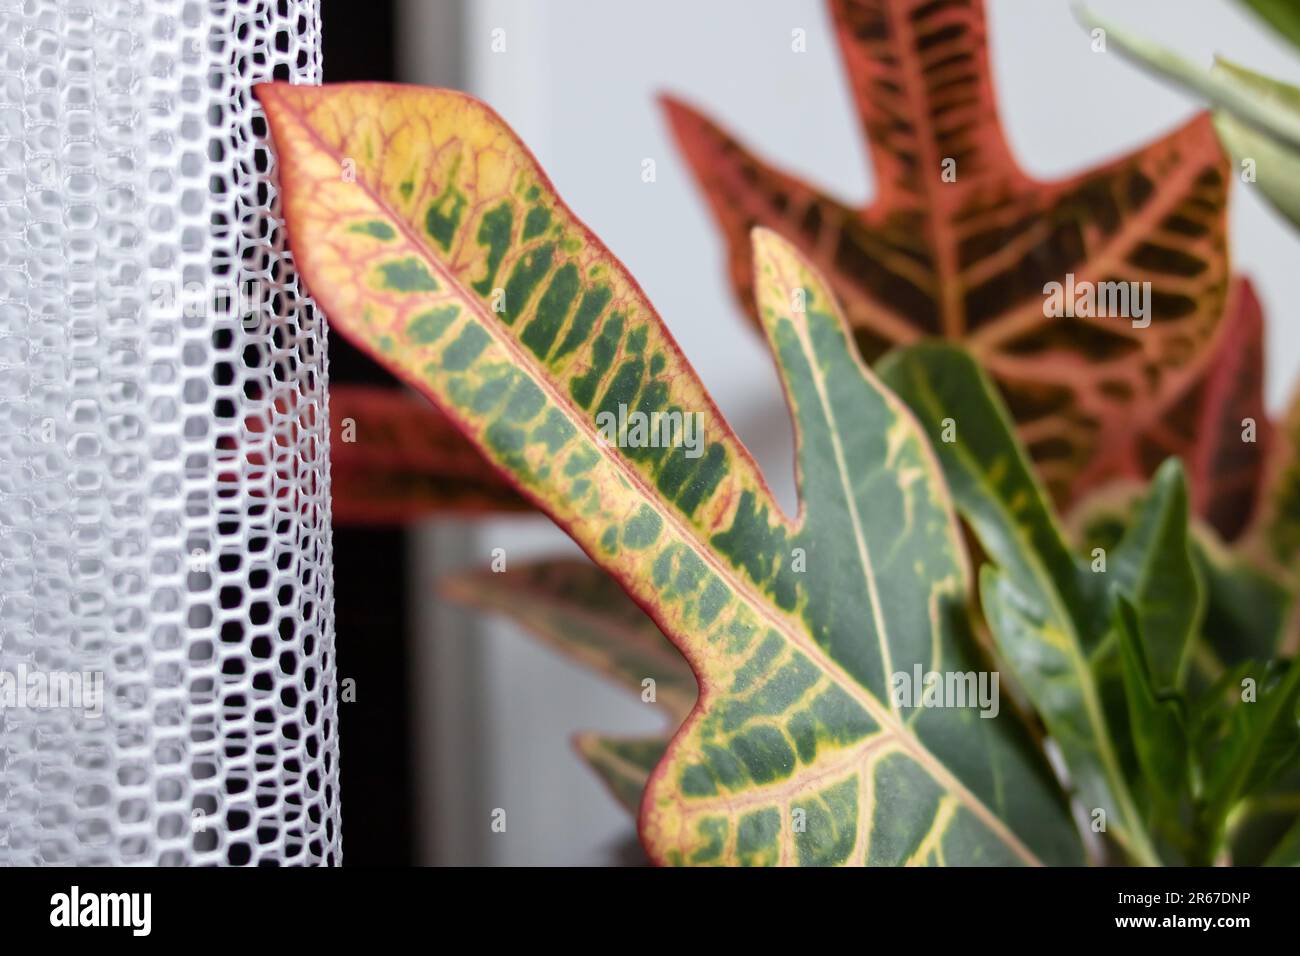 Large red-green leaf of a house plant close up Stock Photo